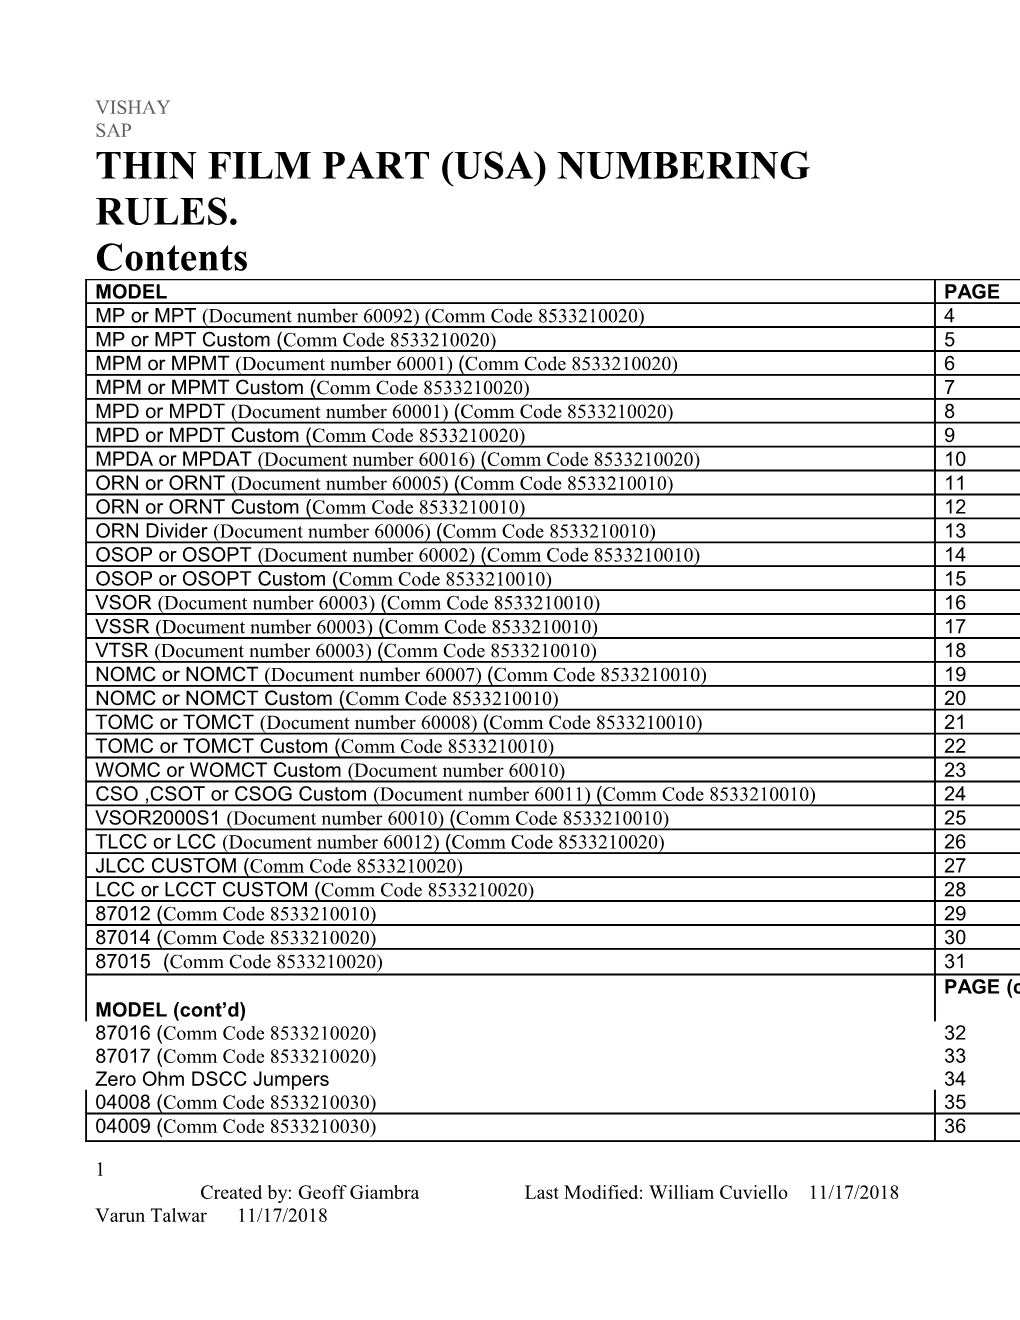 SAP Part Numbering Rules for Model E102C